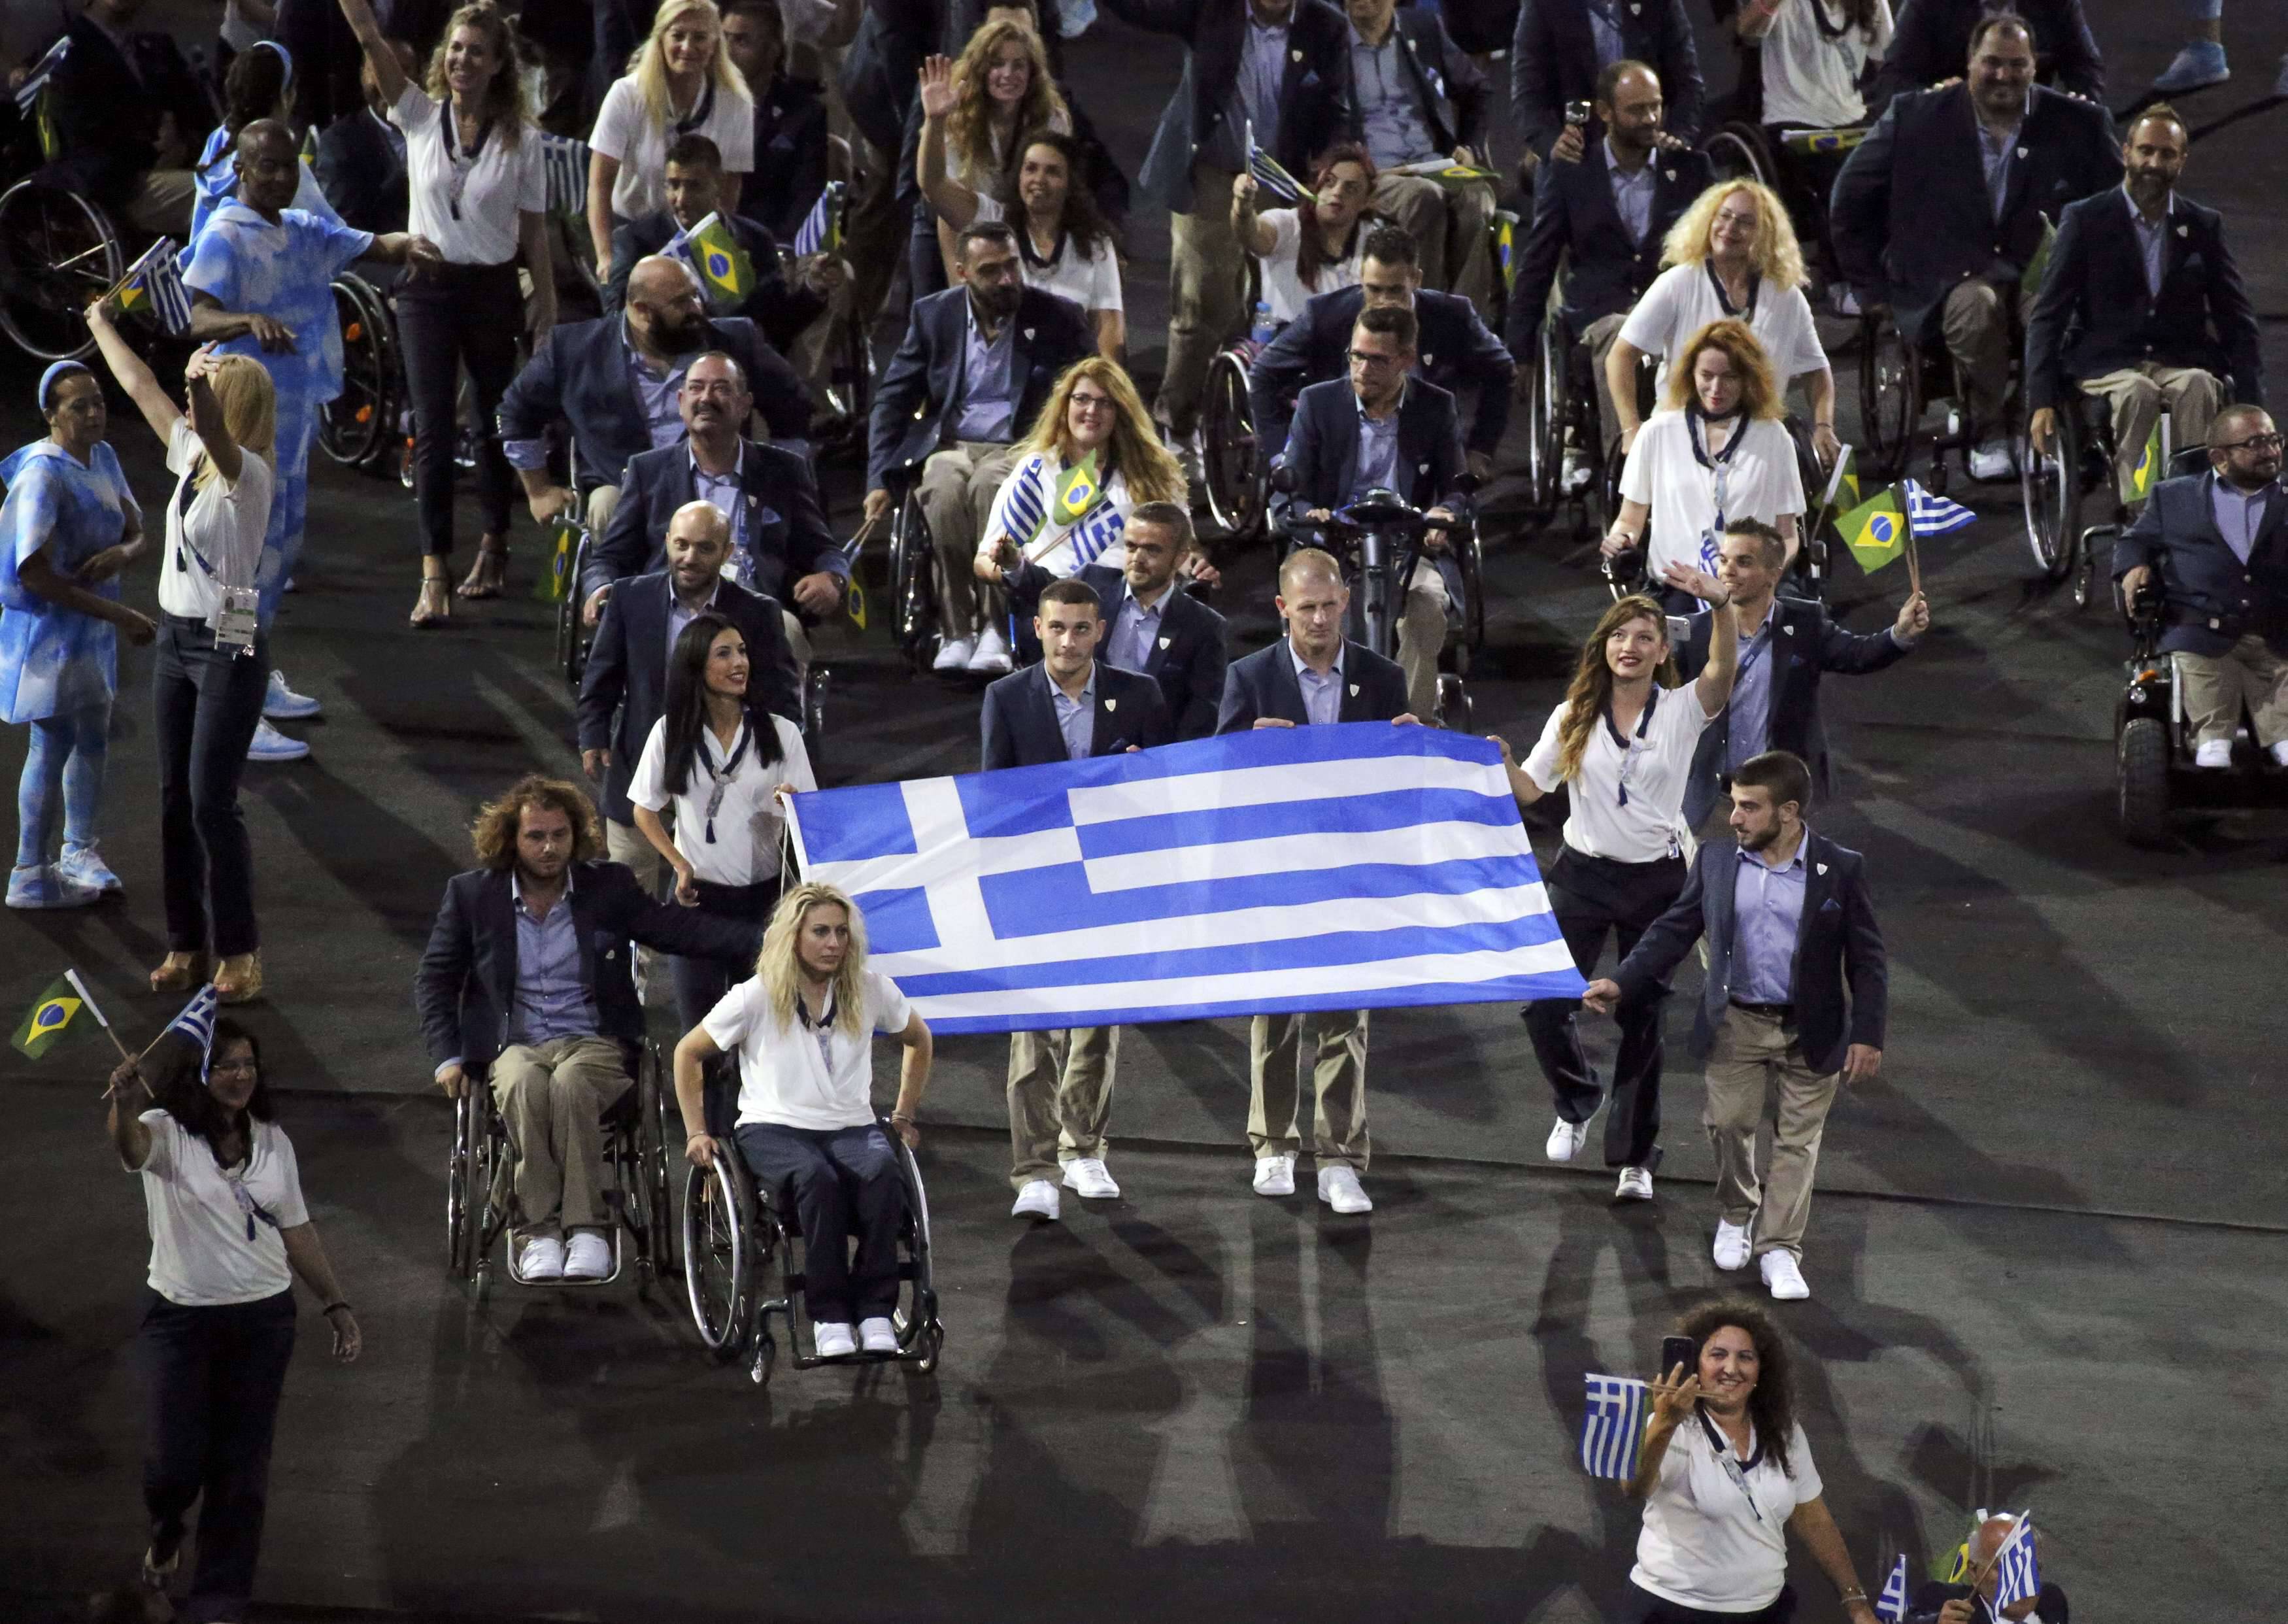 2016 Rio Paralympics - Opening ceremony - Maracana - Rio de Janeiro, Brazil - 07/09/2016. Athletes from Greece take part in the opening ceremony. REUTERS/Sergio Moraes FOR EDITORIAL USE ONLY. NOT FOR SALE FOR MARKETING OR ADVERTISING CAMPAIGNS.